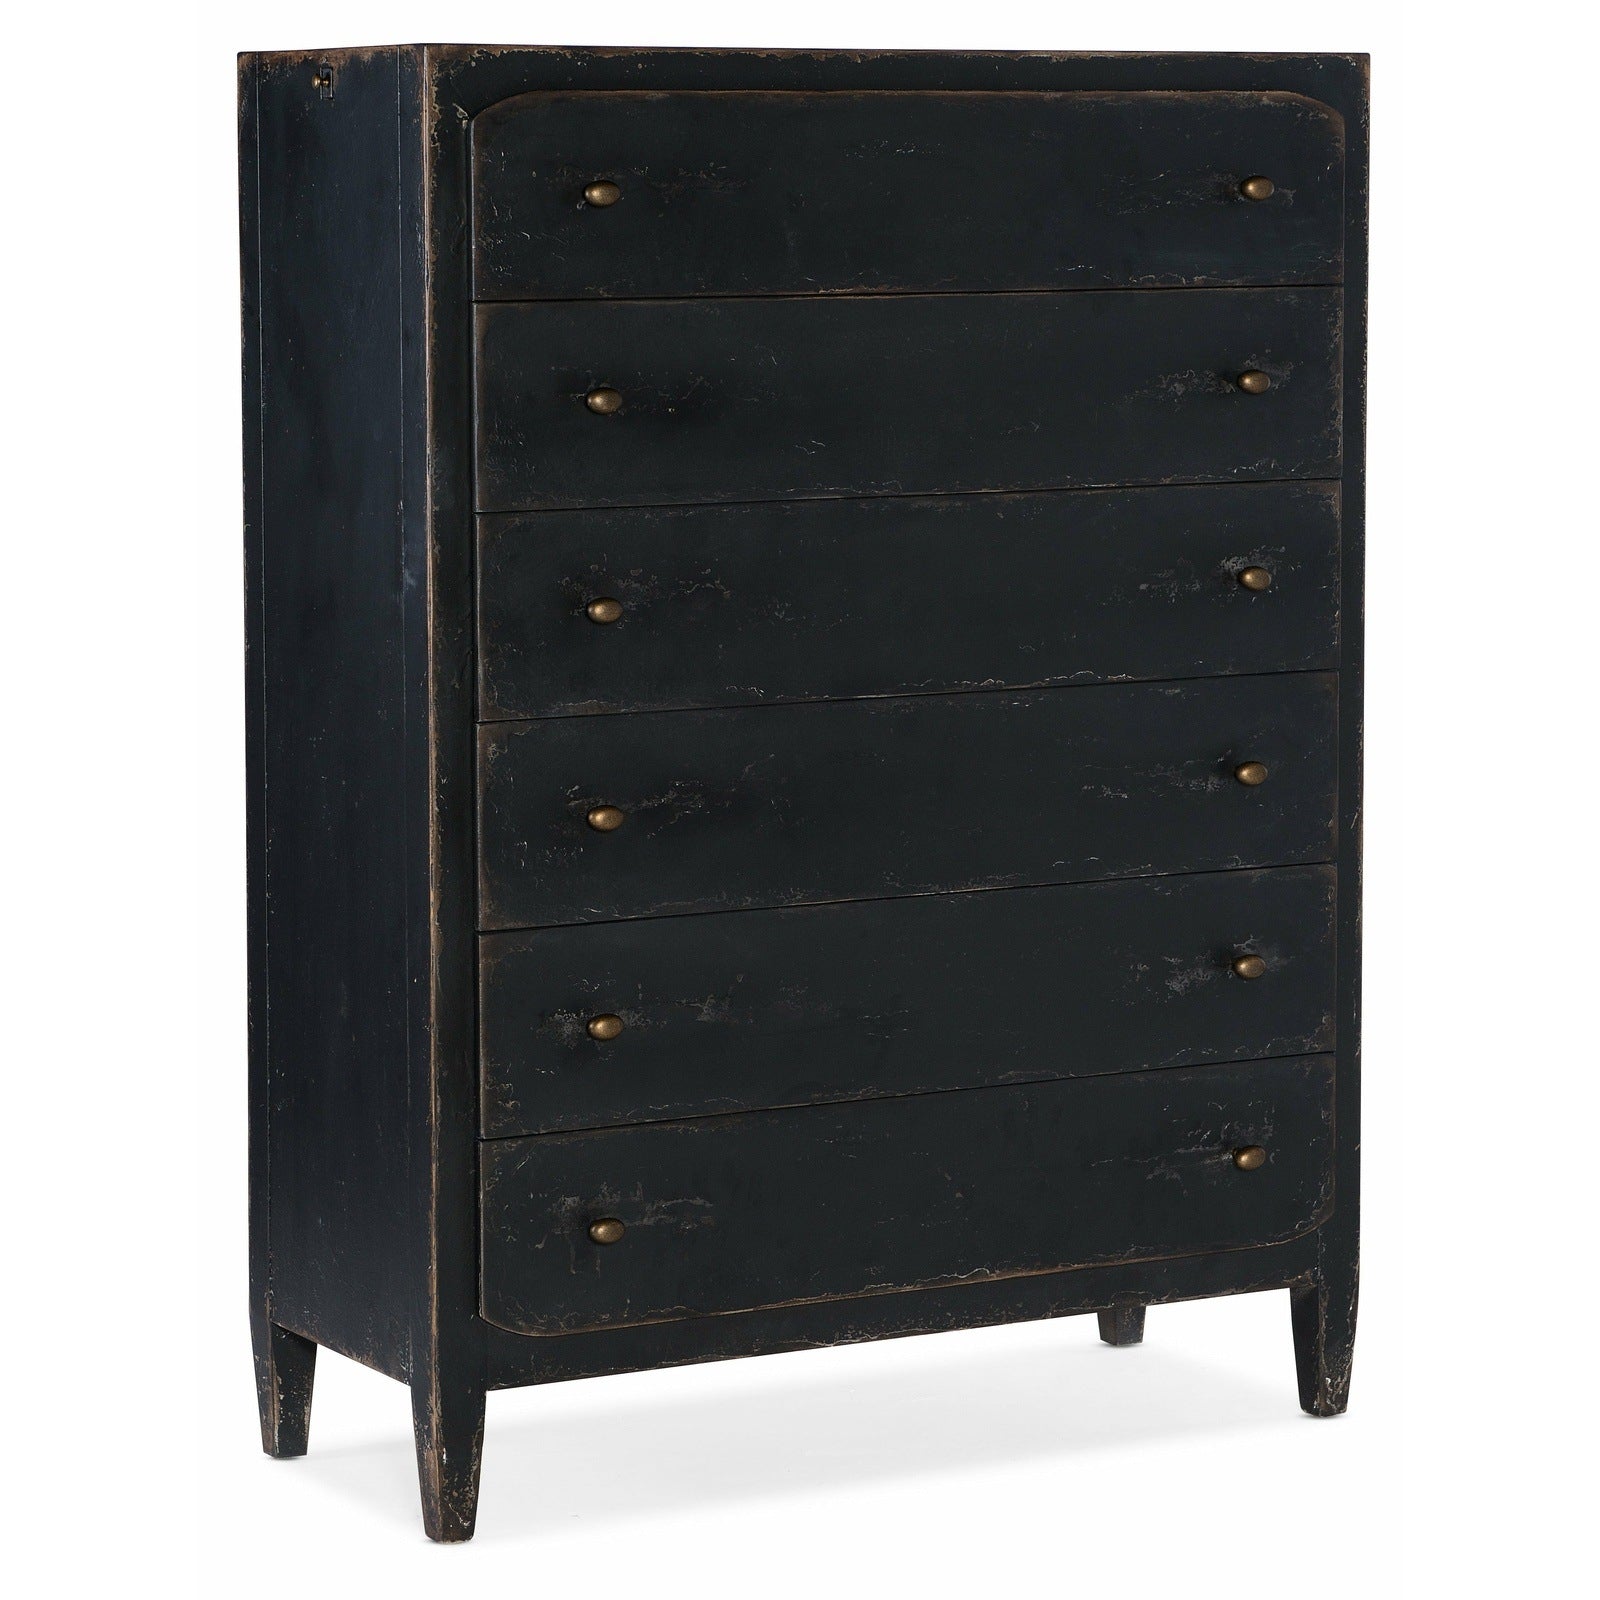 Ciao Bella Black Six Drawer Chest